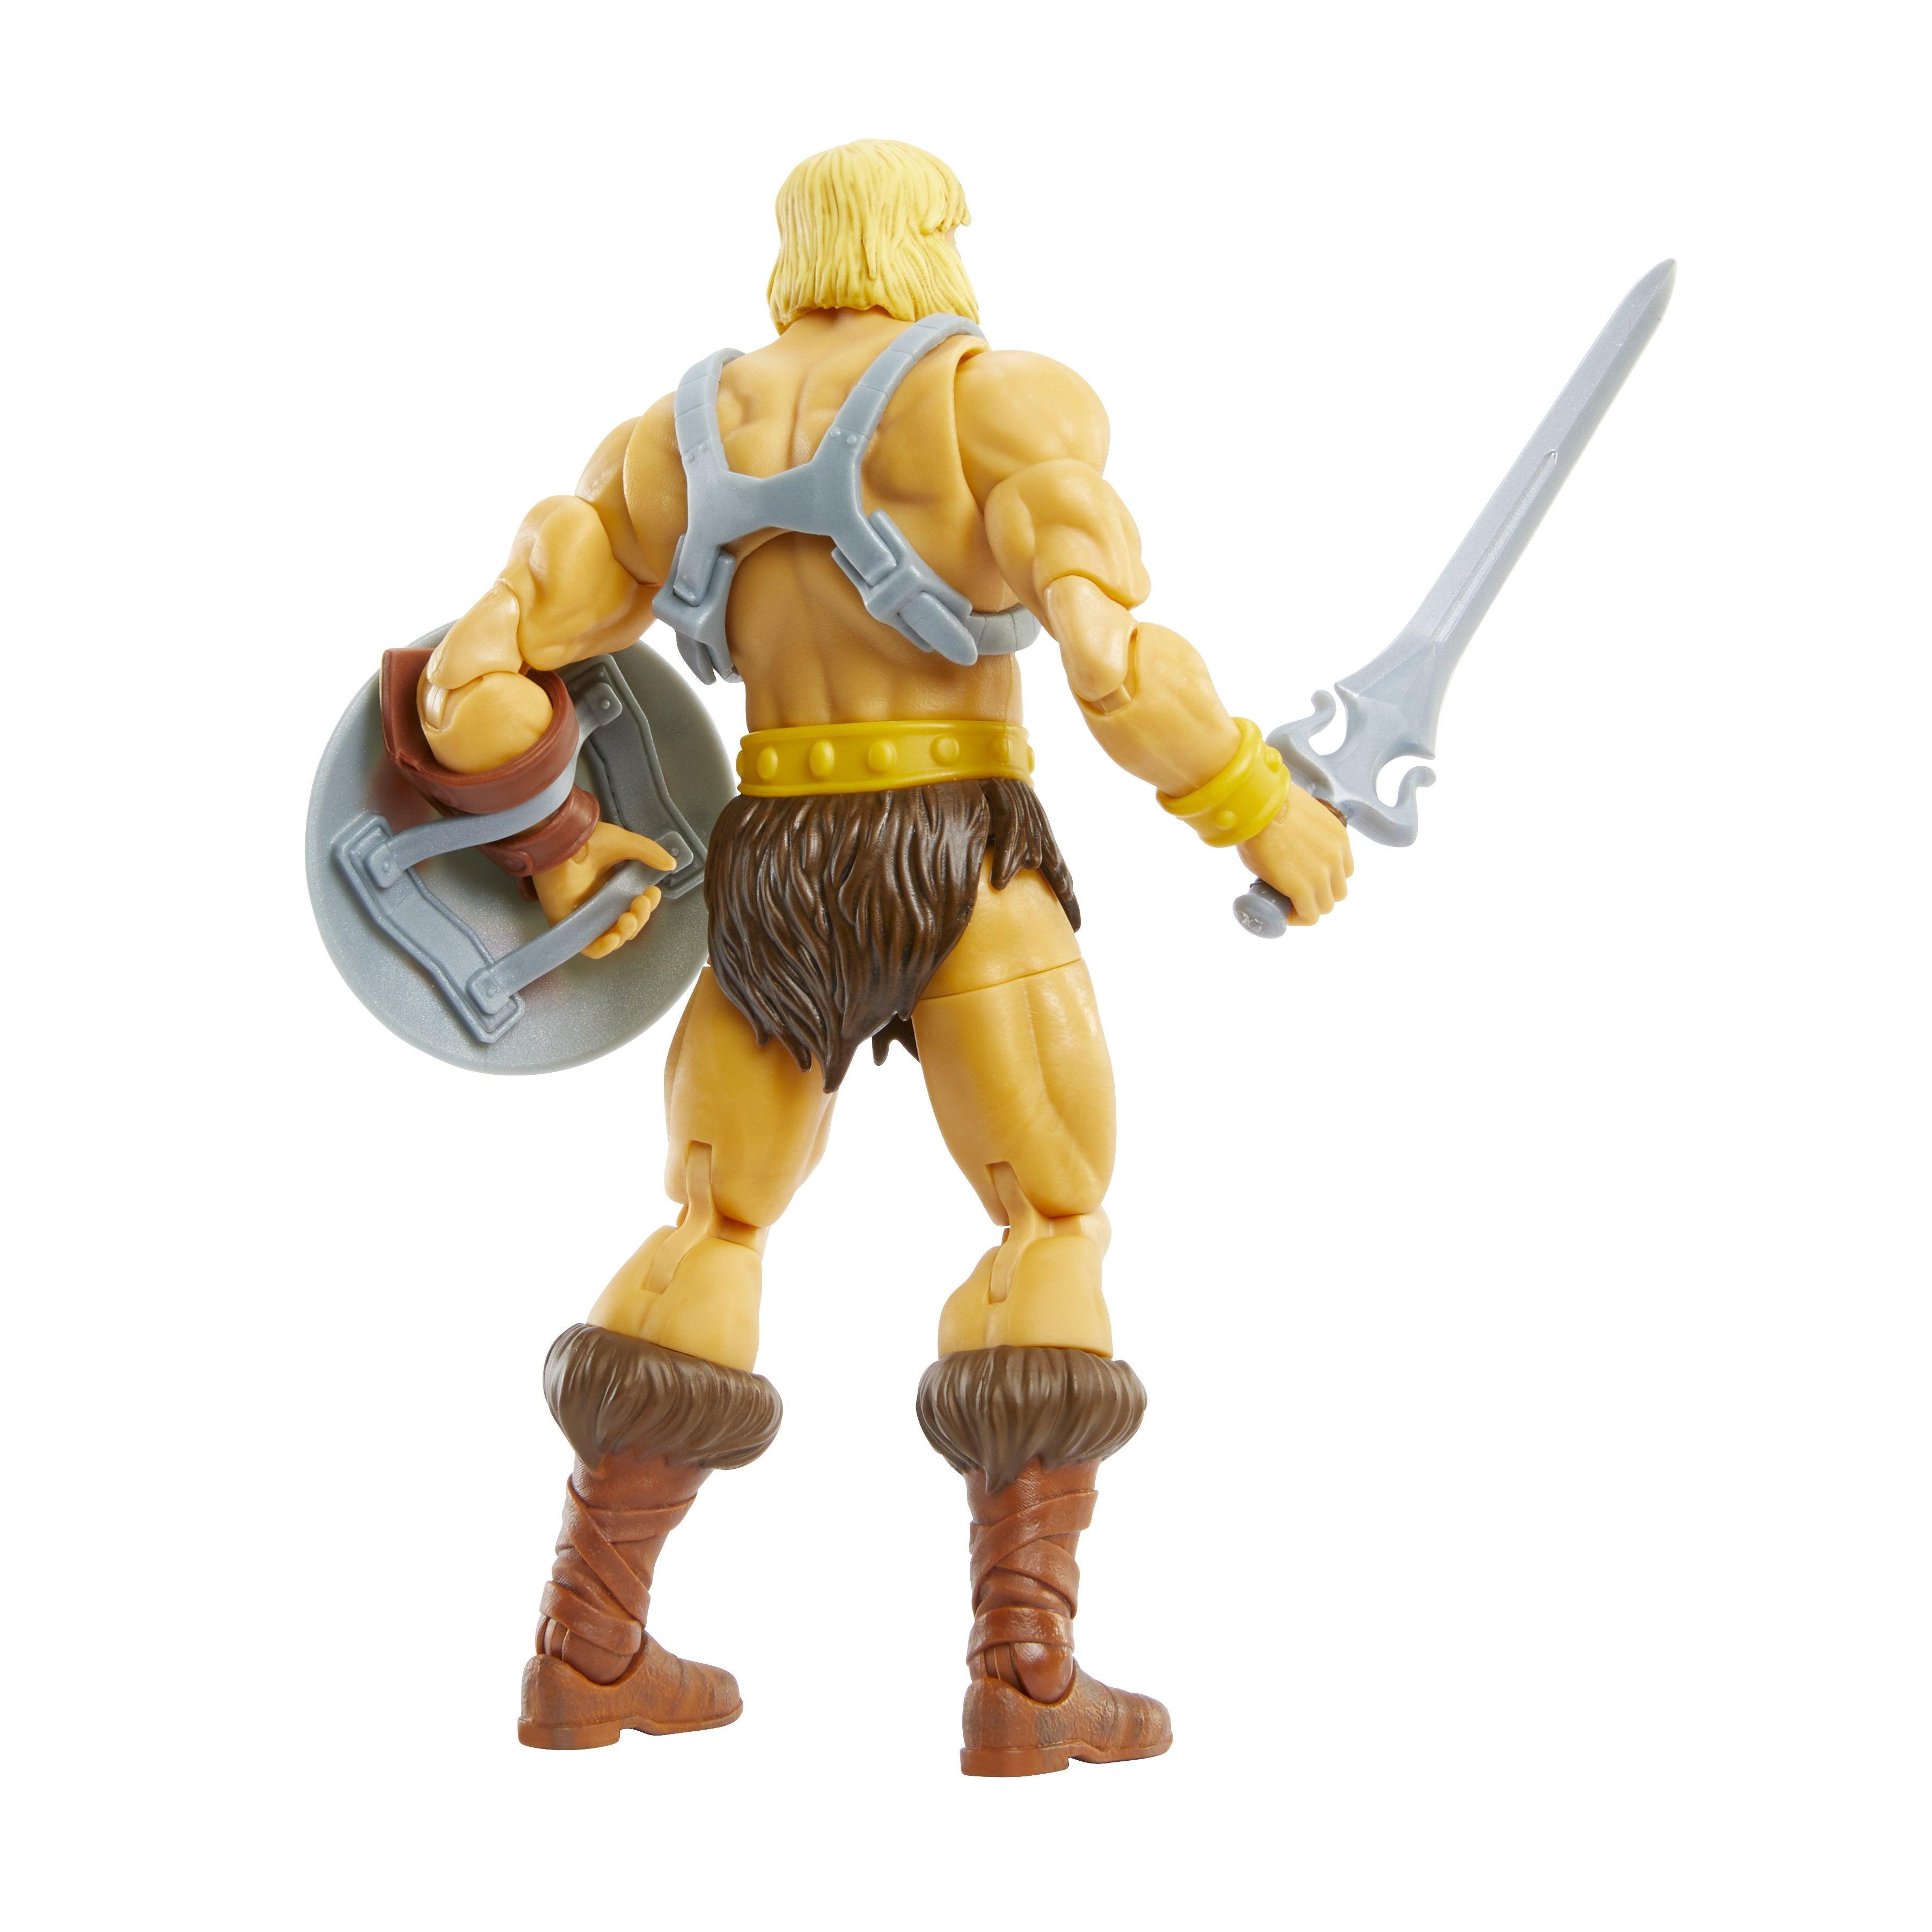 Masters of the Universe - Masterverse He-Man Classic Action Figure - FunCorp India